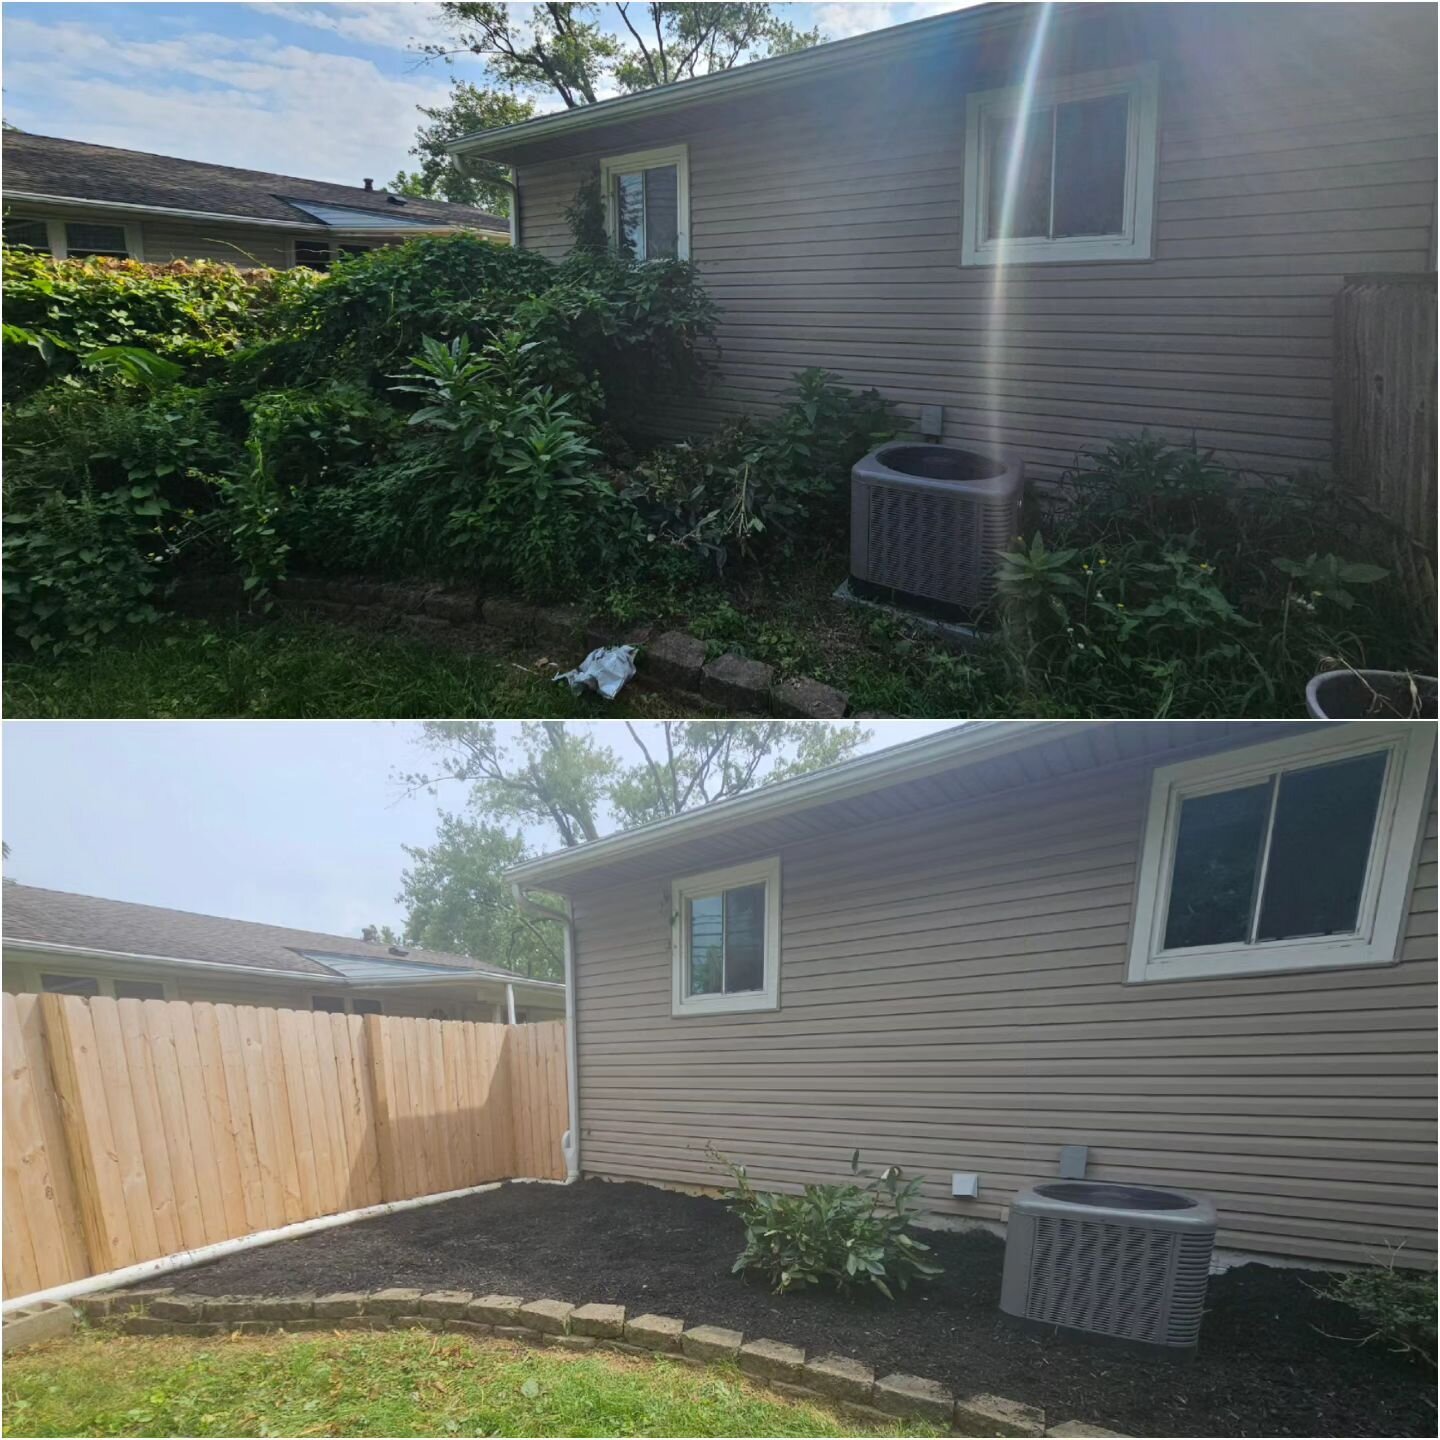 From Overgrown to Immaculate: Witness the Magic of Property Cleanups 🏞️✨
#PropertyCleanup #BeforeAndAfter #CleanSlate